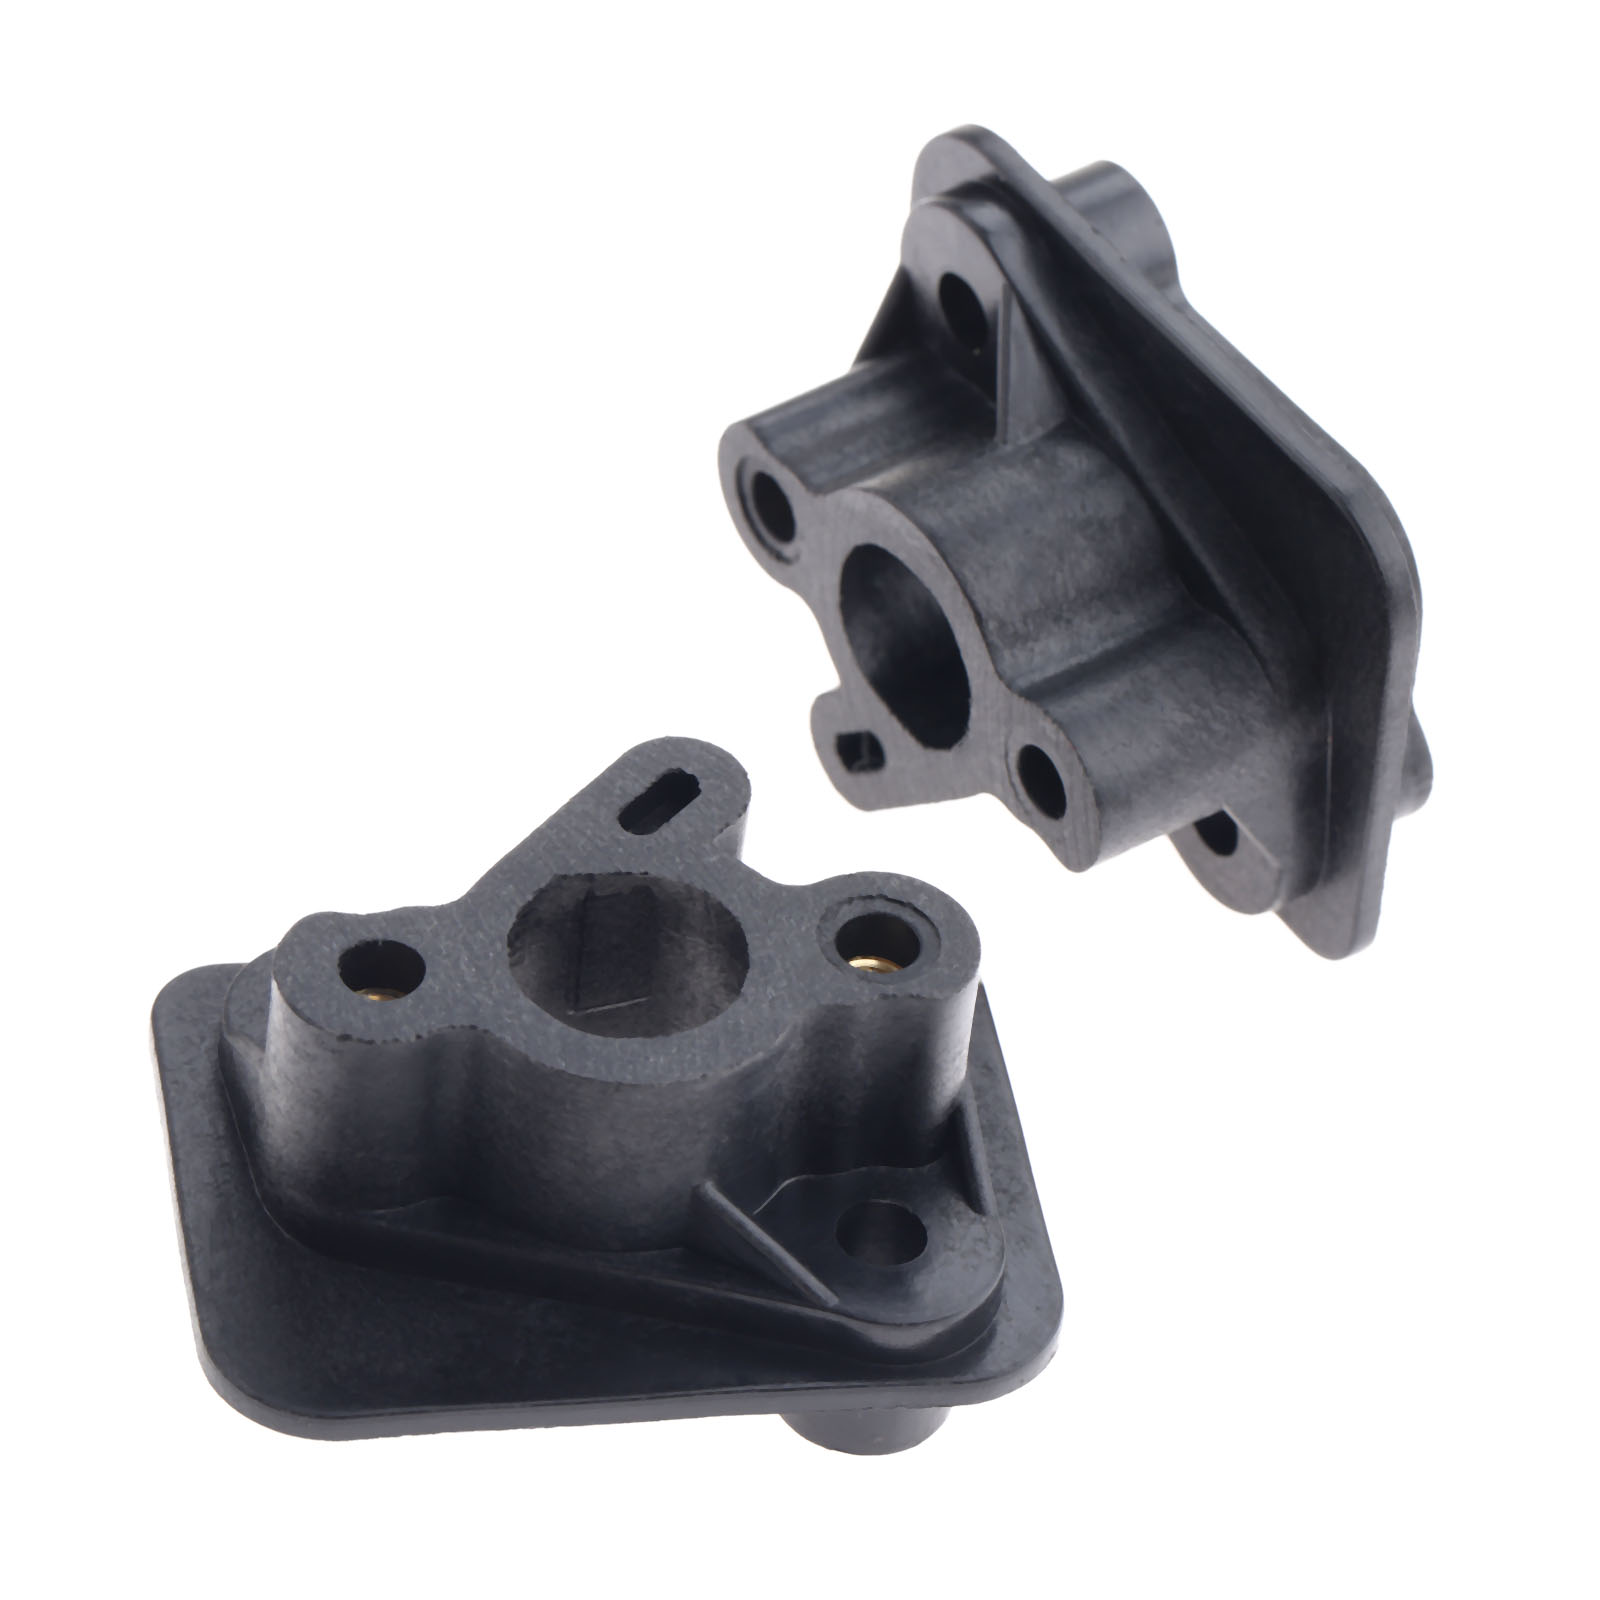 Dreld 2 pcs Ʈ ǰ  40-5 43cc 52cc 귯 Ŀ  Ŵ  ȭ⺣̽ Ŀ admitting pipe carb adapter